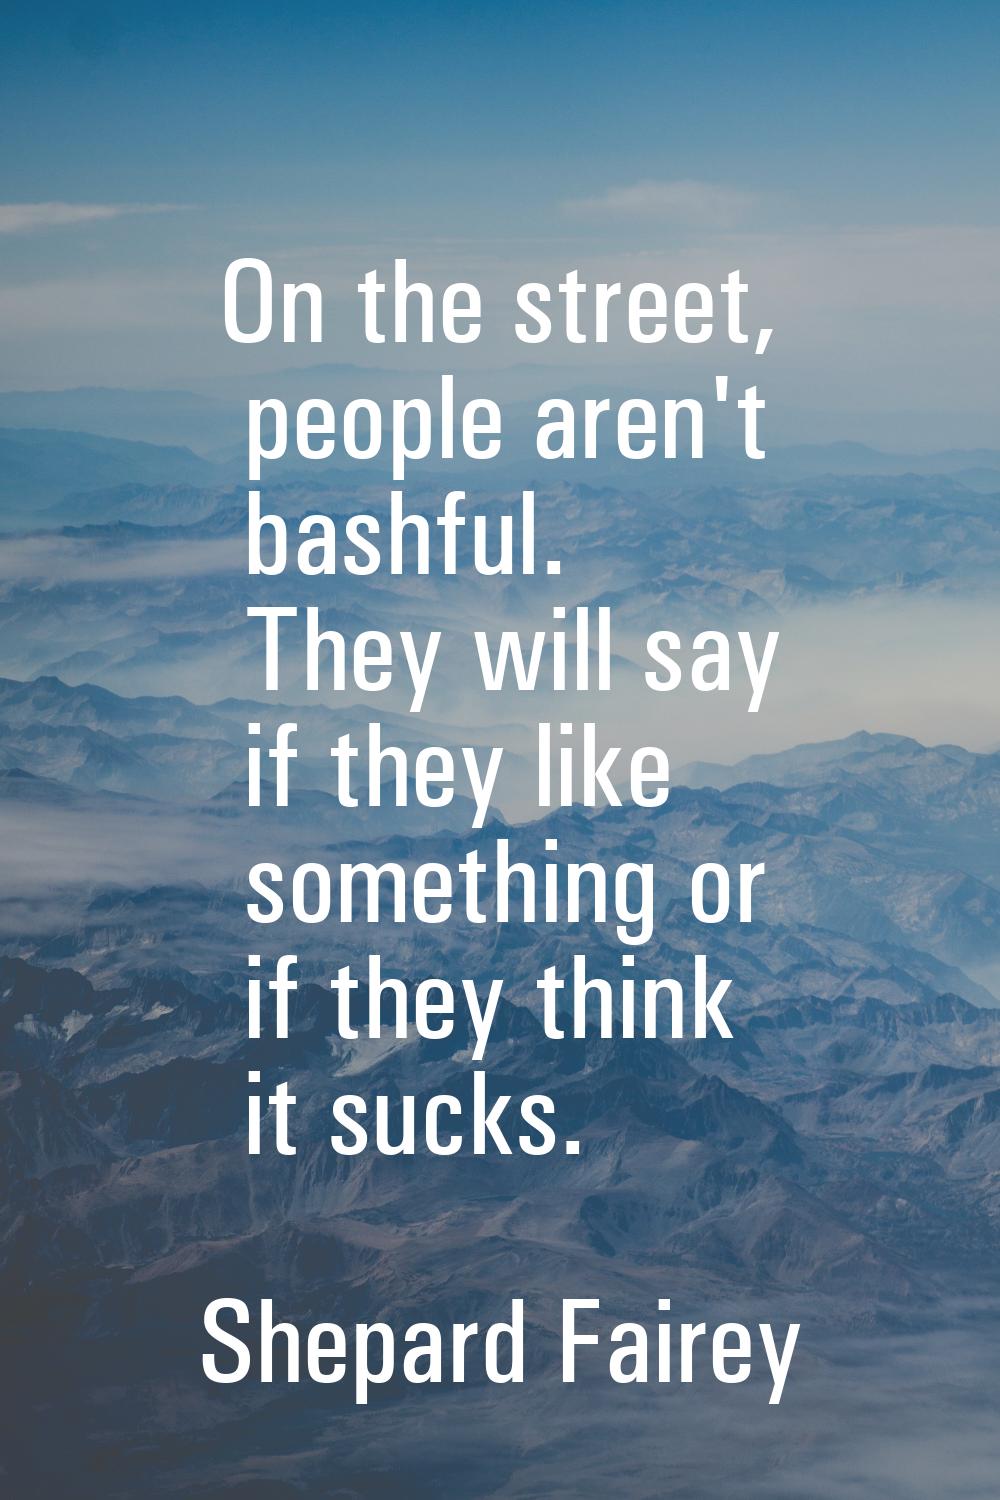 On the street, people aren't bashful. They will say if they like something or if they think it suck